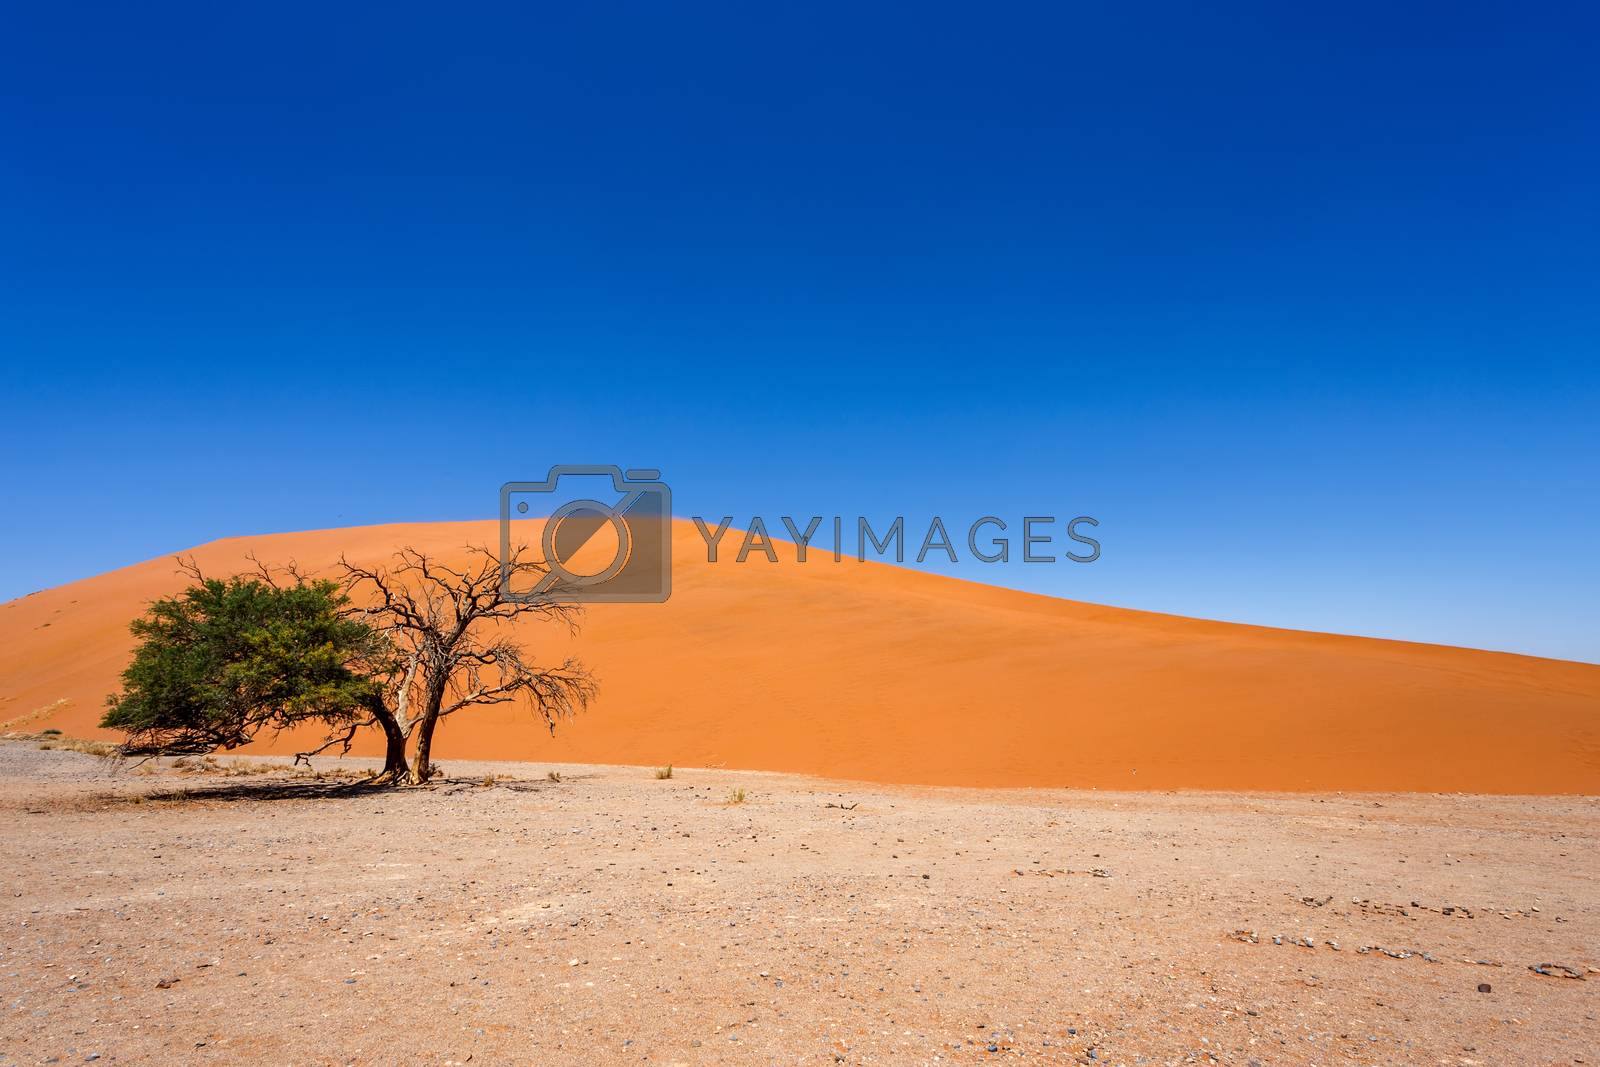 Royalty free image of Dune 45 in sossusvlei Namibia with green tree by artush